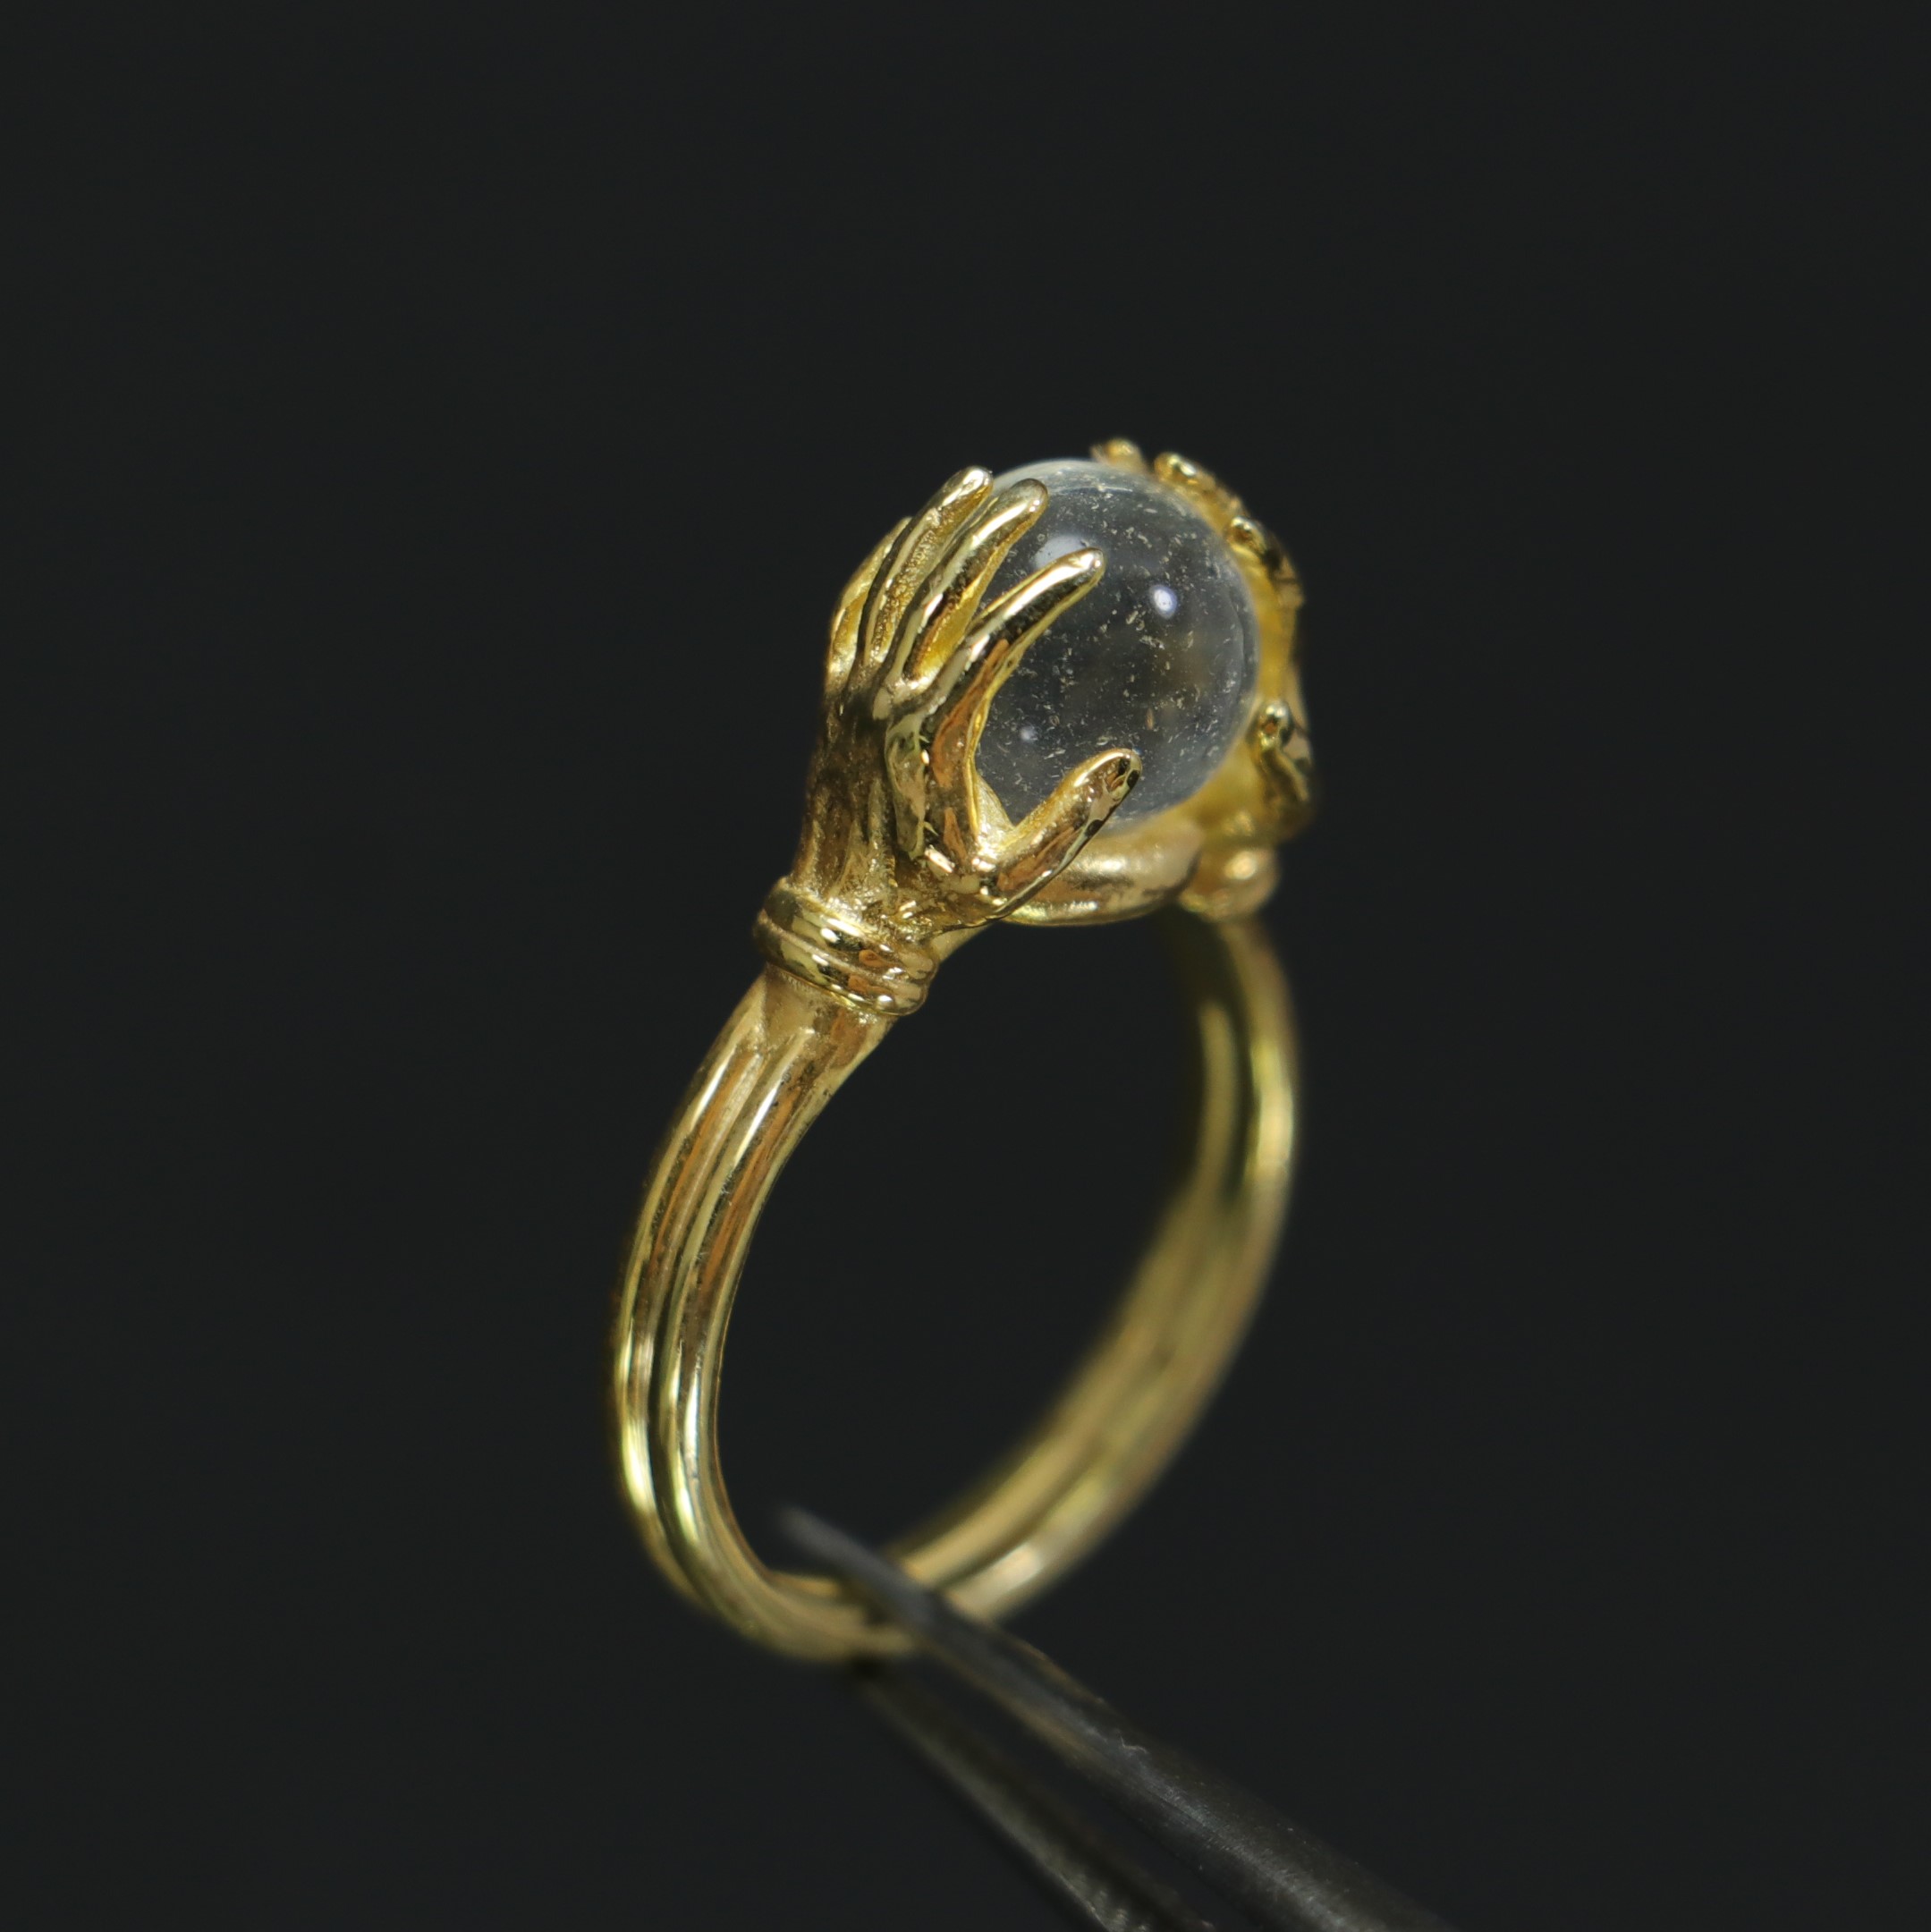 Clear Quartz 925 Sterling Silver Gold Plated Ring Between Hands